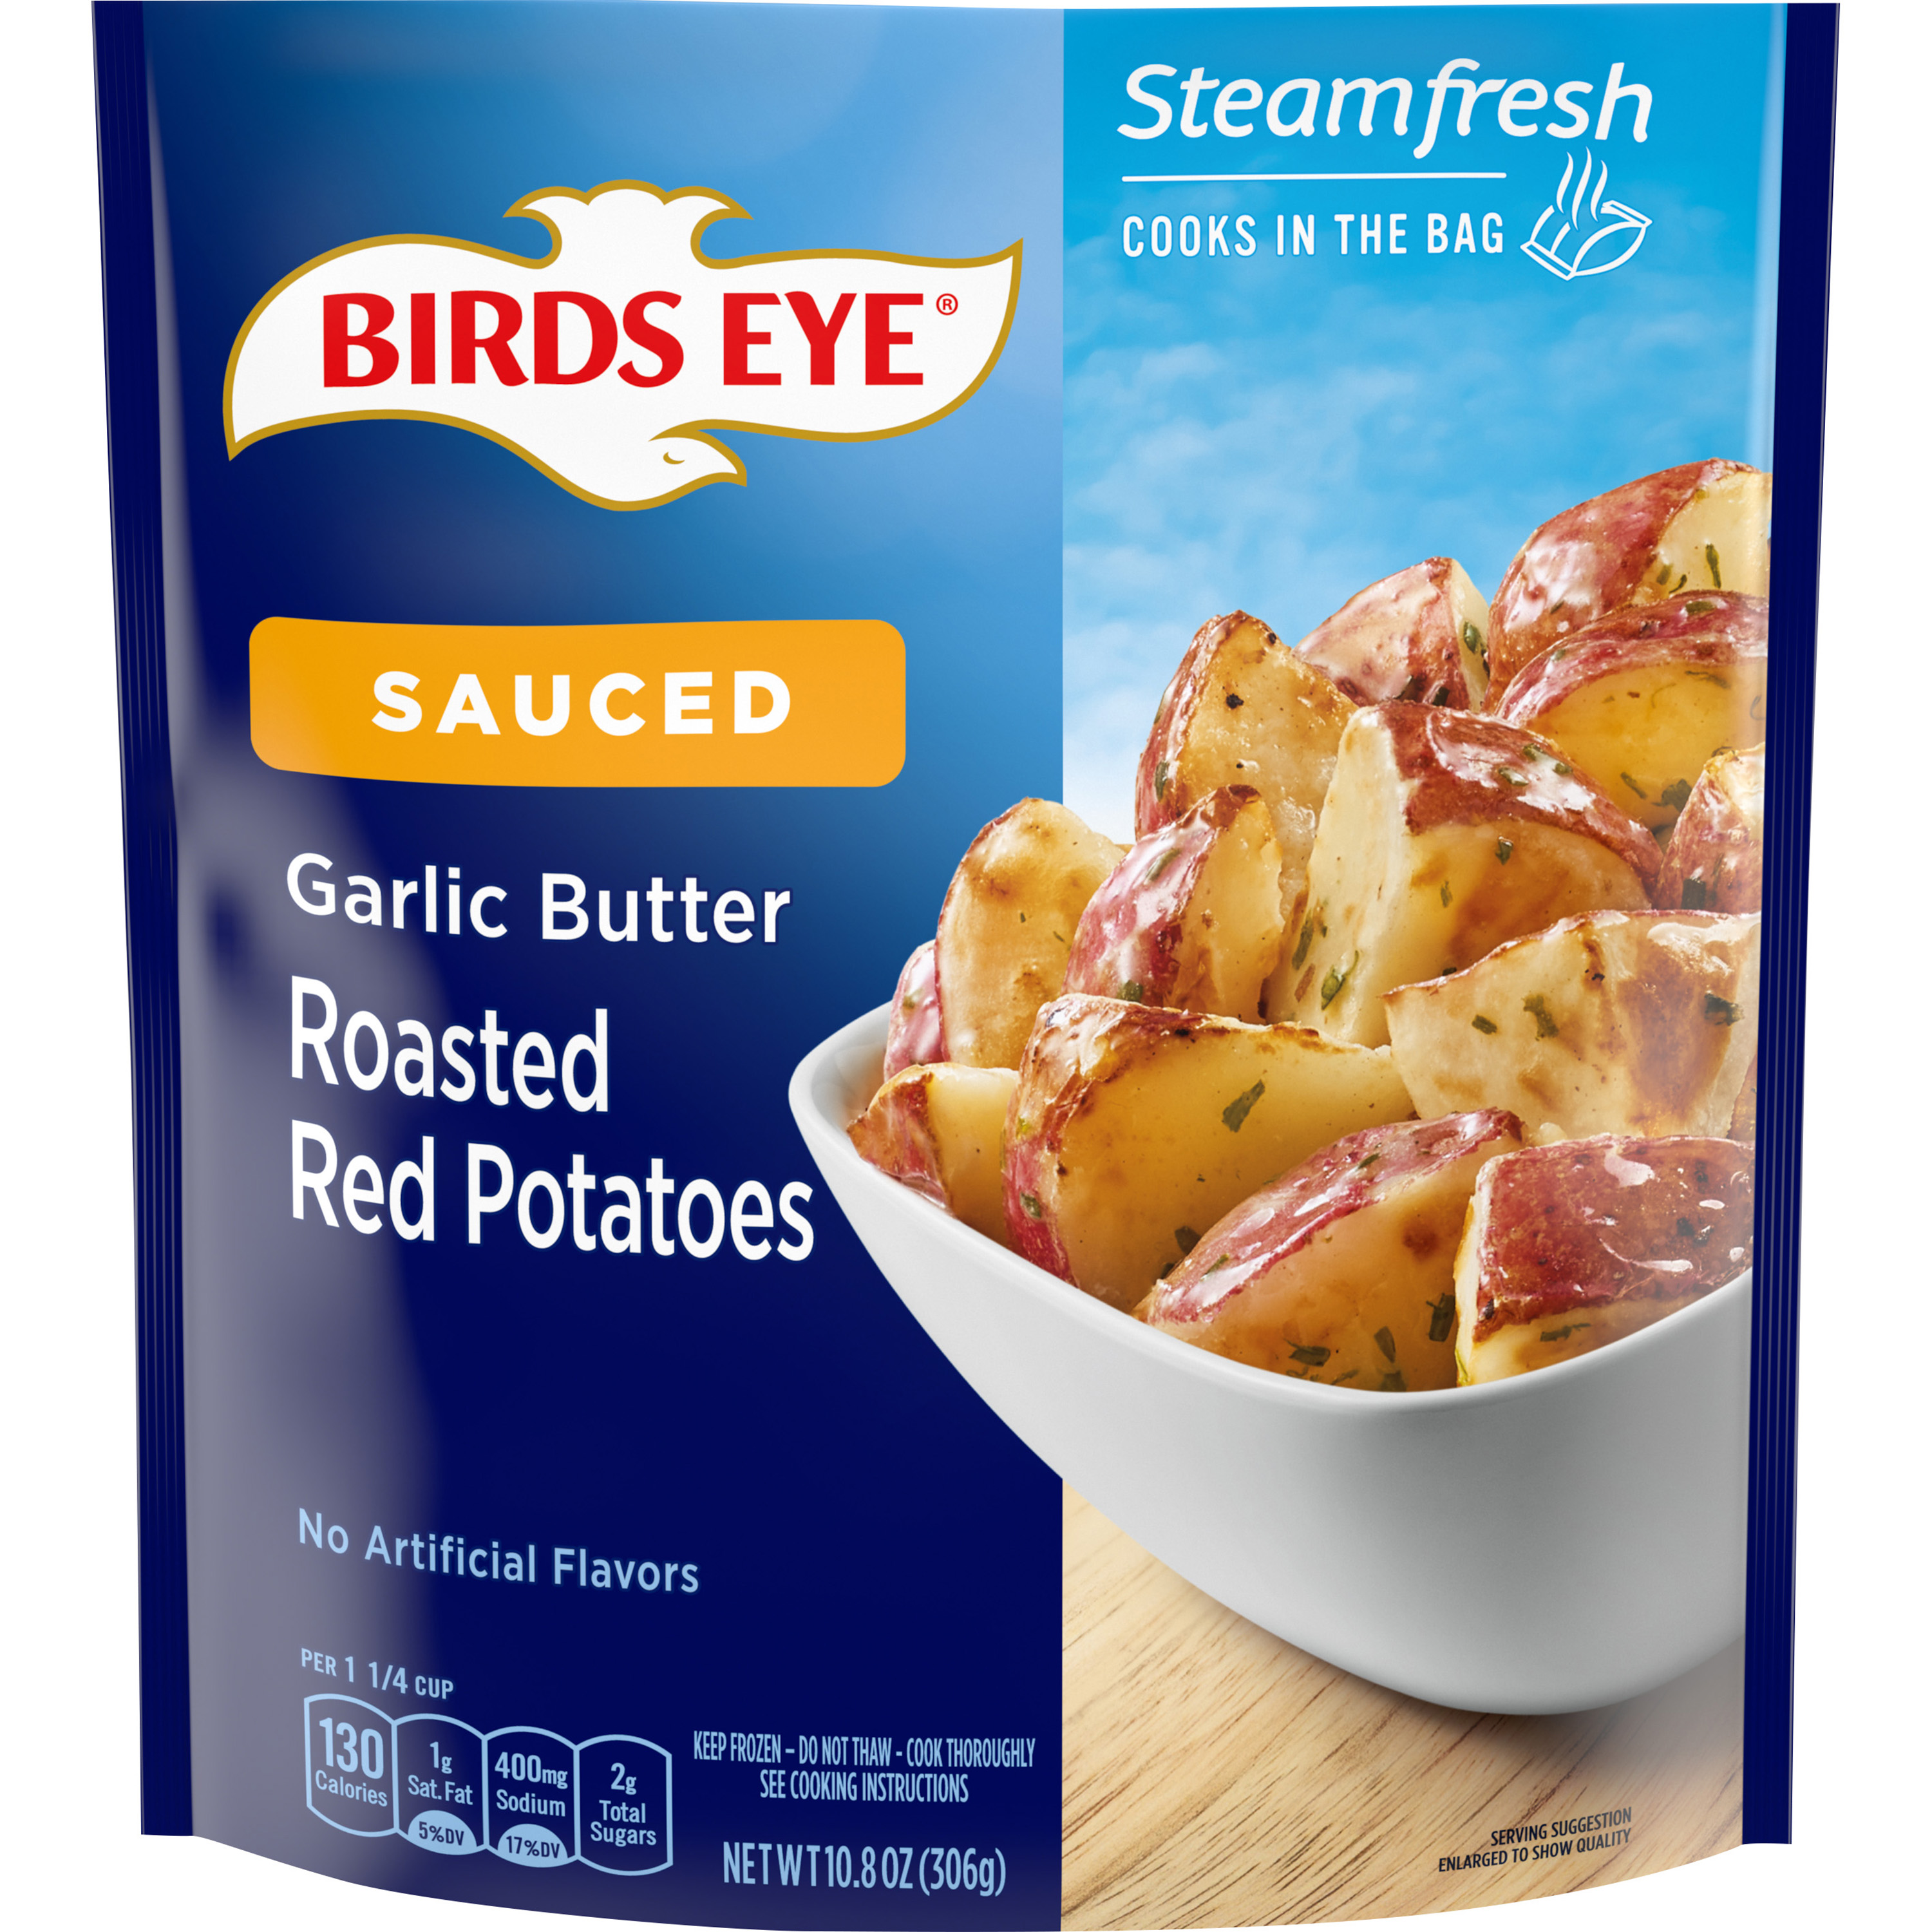 Birds Eye Steamfresh Chef’s Favorites Sauced Roasted Red Potatoes with Oven Roasted Garlic Butter Sauce